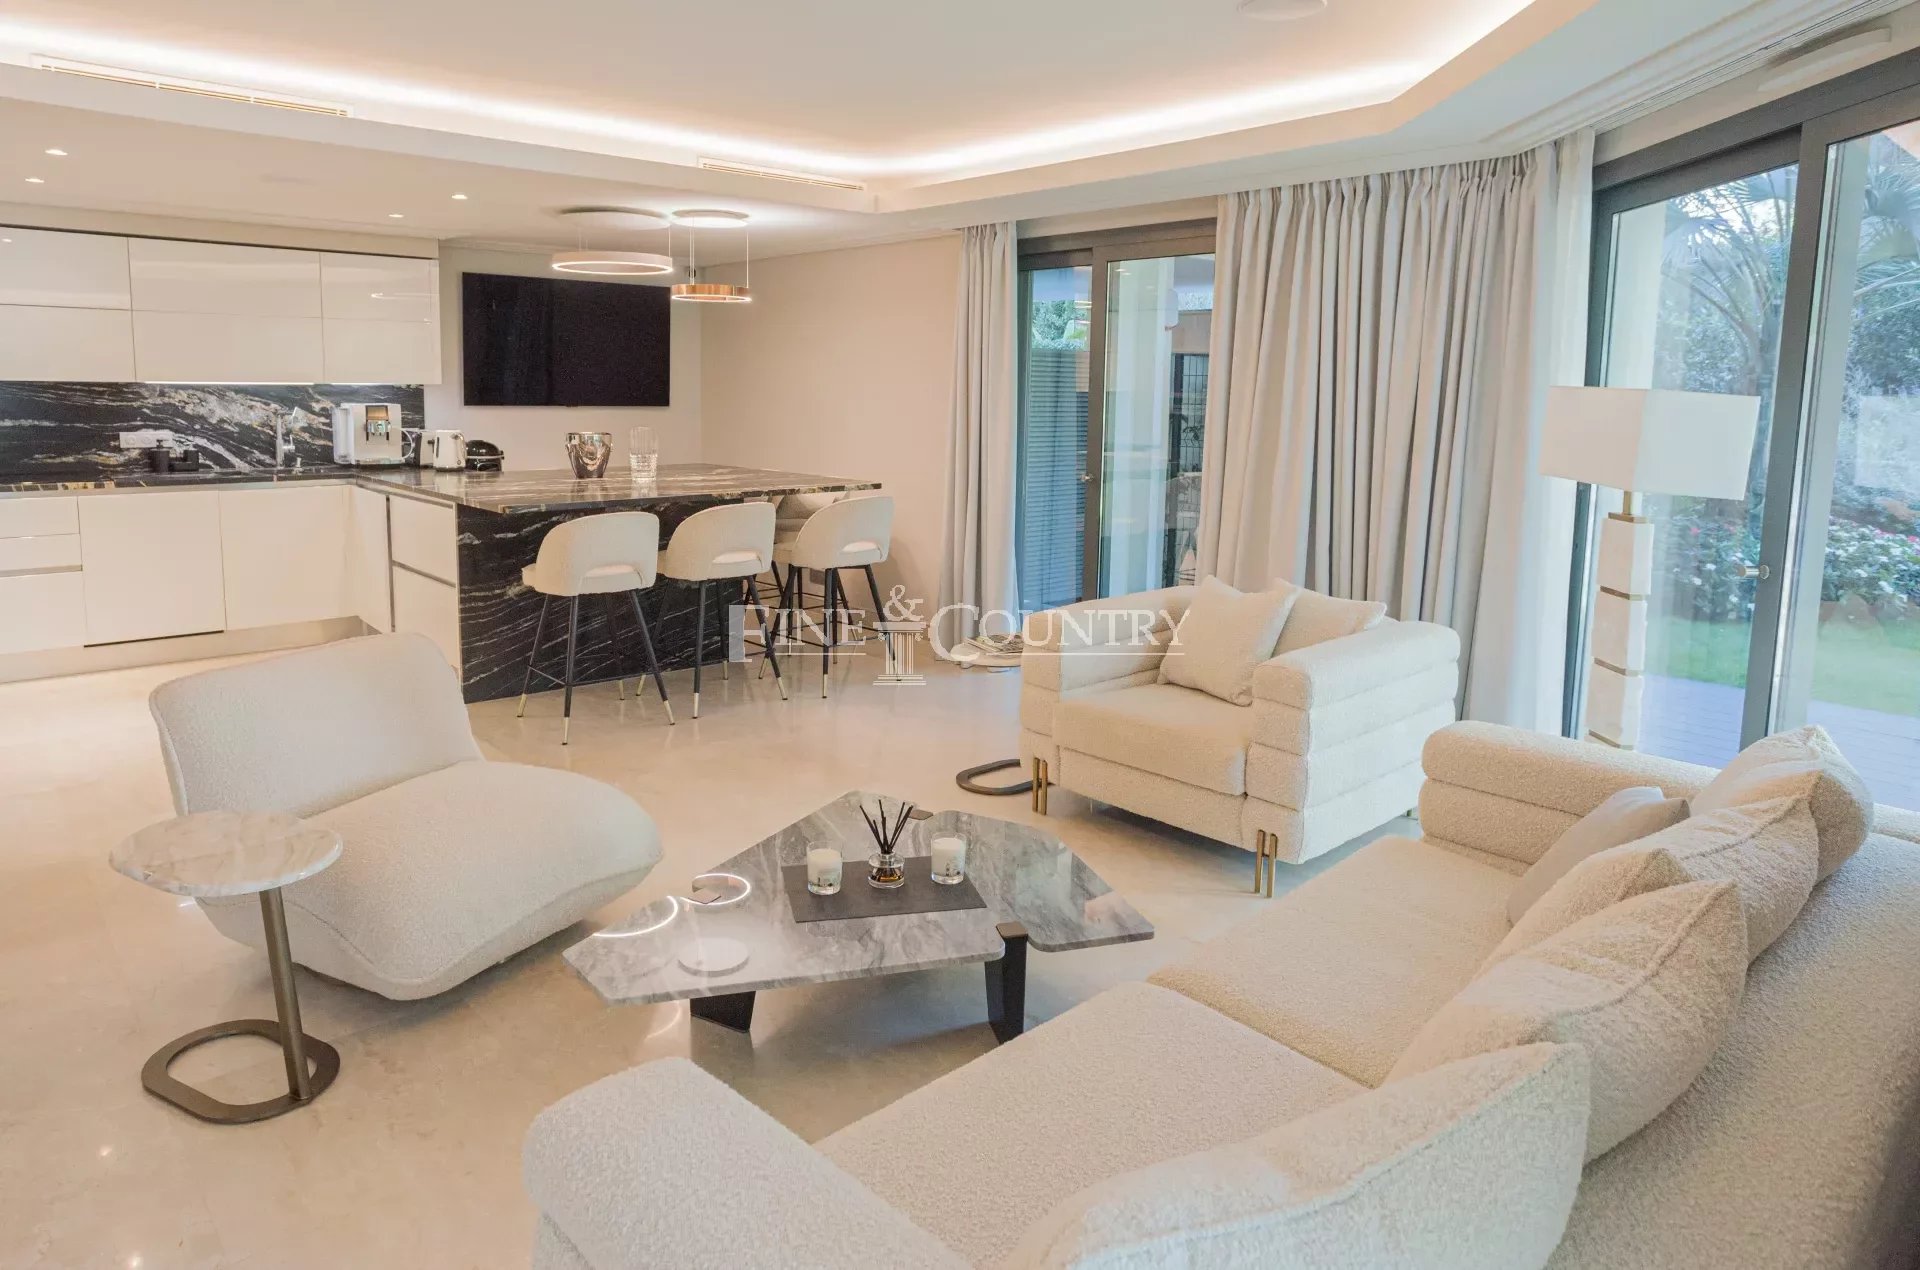 Apartment for sale in Parc du Cap / Cap d'Antibes Accommodation in Cannes